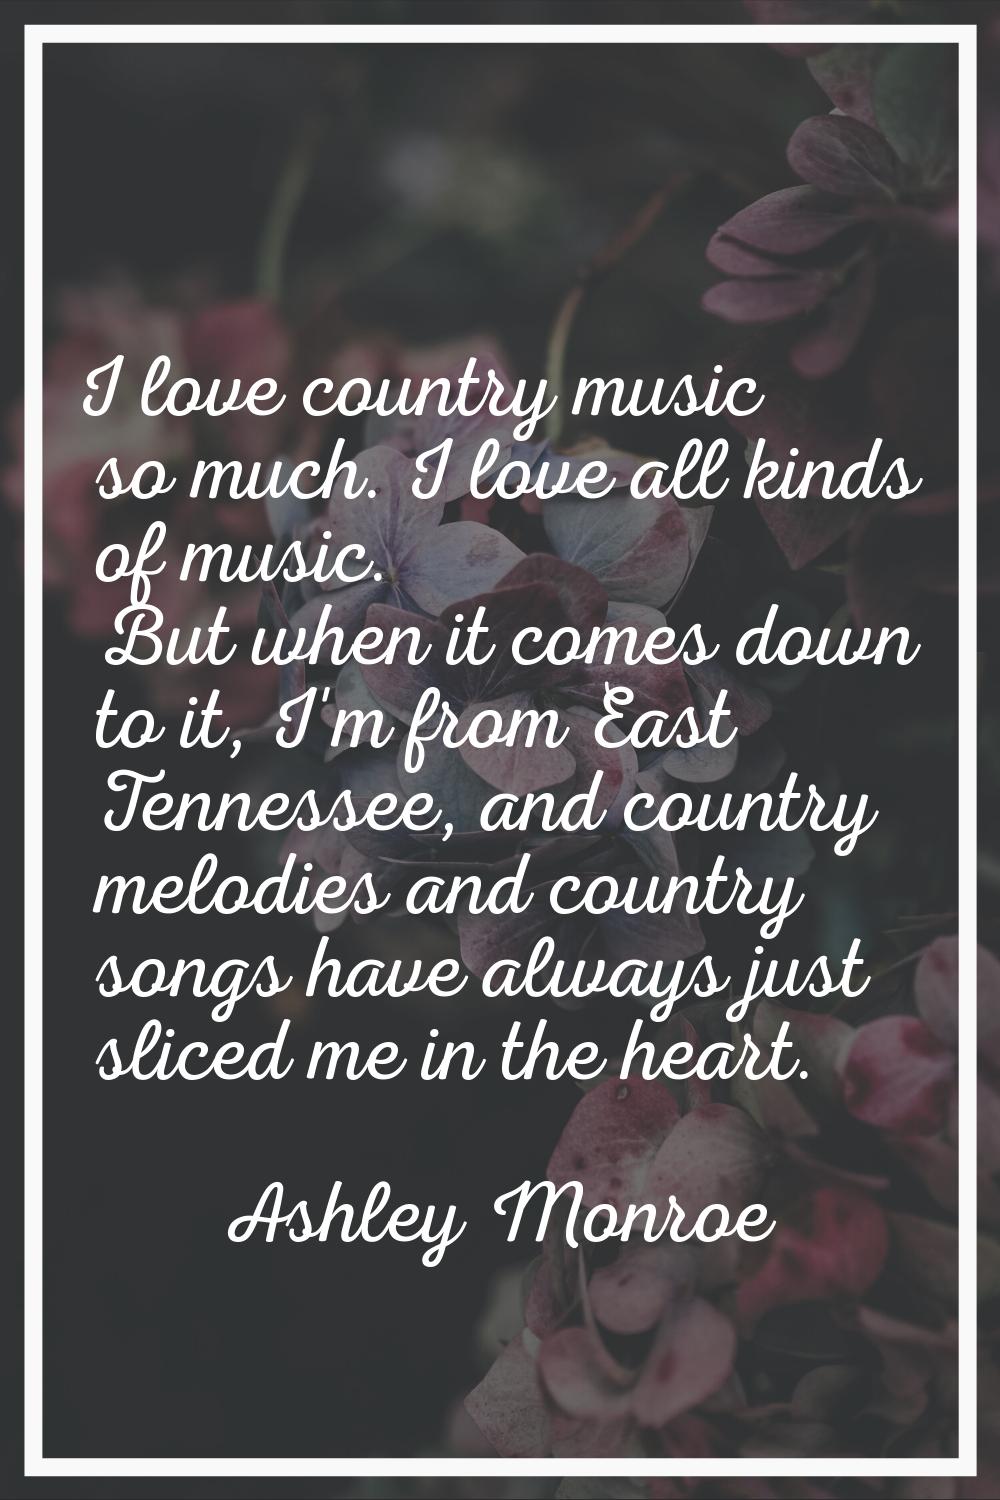 I love country music so much. I love all kinds of music. But when it comes down to it, I'm from Eas